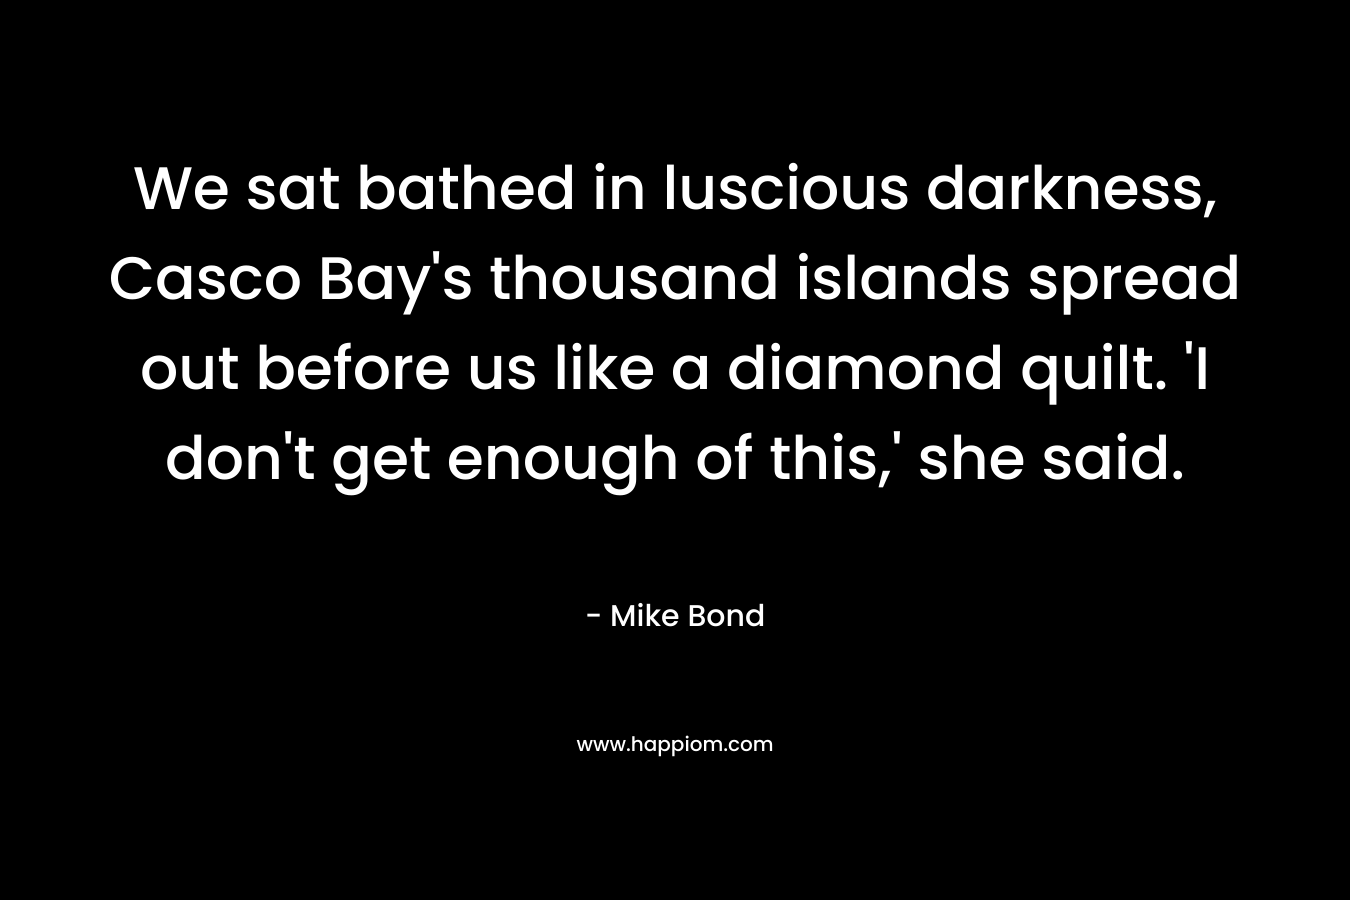 We sat bathed in luscious darkness, Casco Bay's thousand islands spread out before us like a diamond quilt. 'I don't get enough of this,' she said.